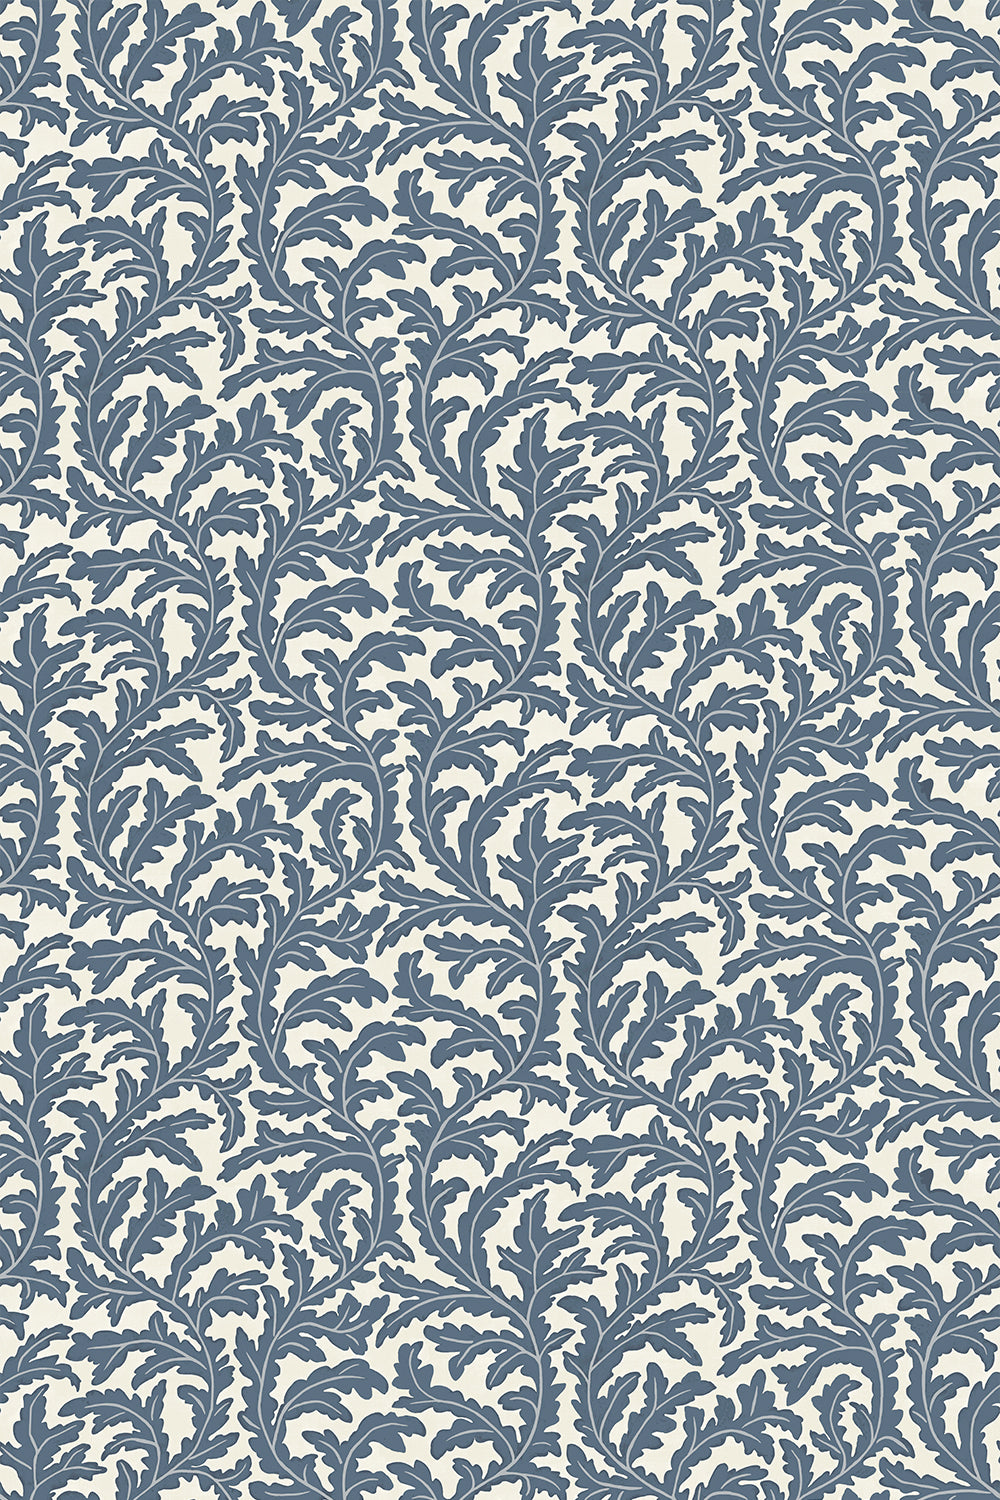 Josephine-Munsey-Wallpaper-Frond-Ogee-Bude-Blue-JMW1025.41.0-traing-leaf-patterns-cottage-wallpaper-country-look